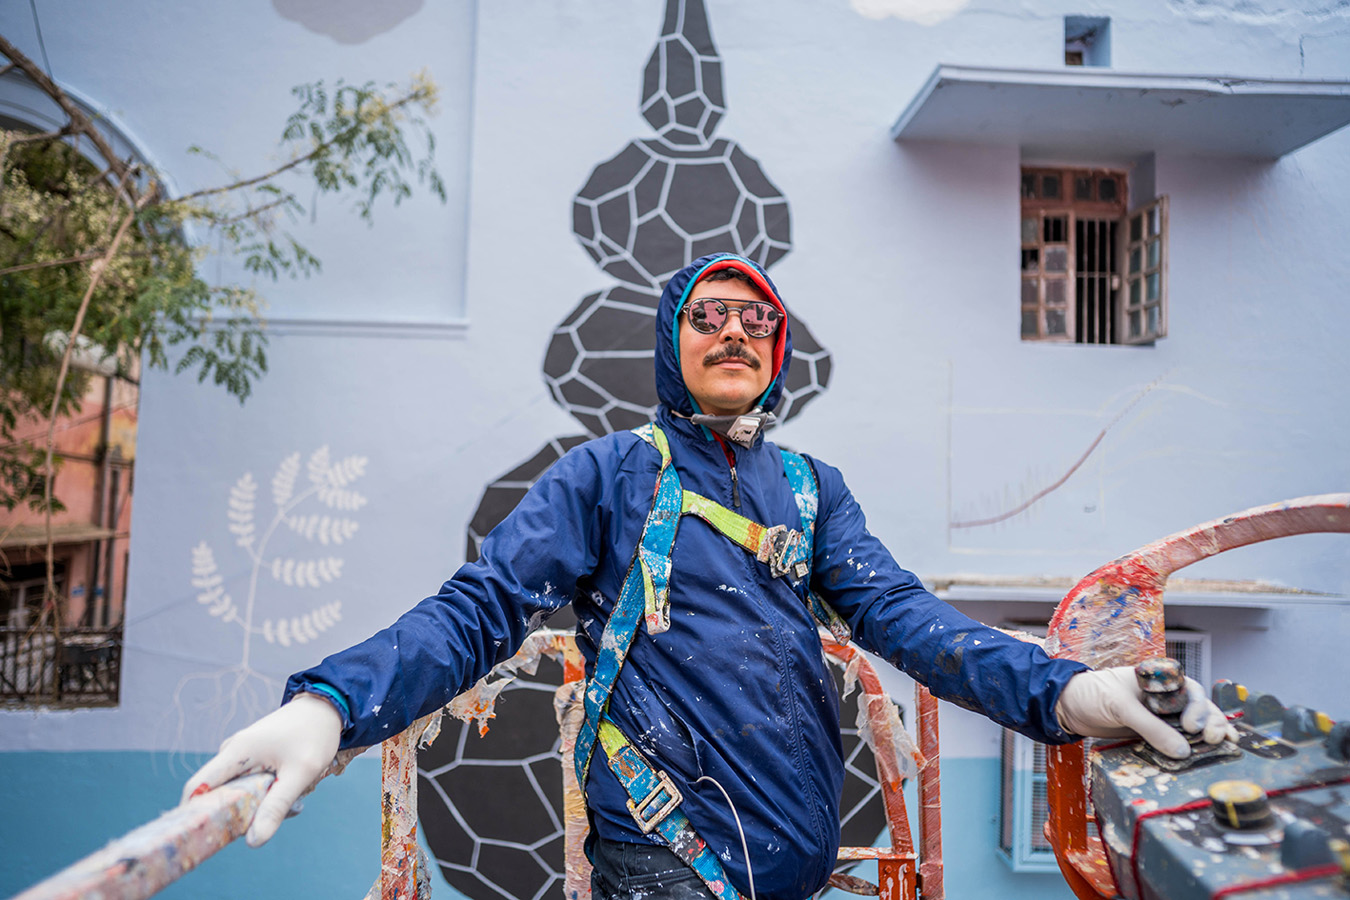 CLIMATE 05 – LIFEGATE: IN NEW DELHI A MURALES AGAINST CLIMATE CHANGE MADE WITH SMOG